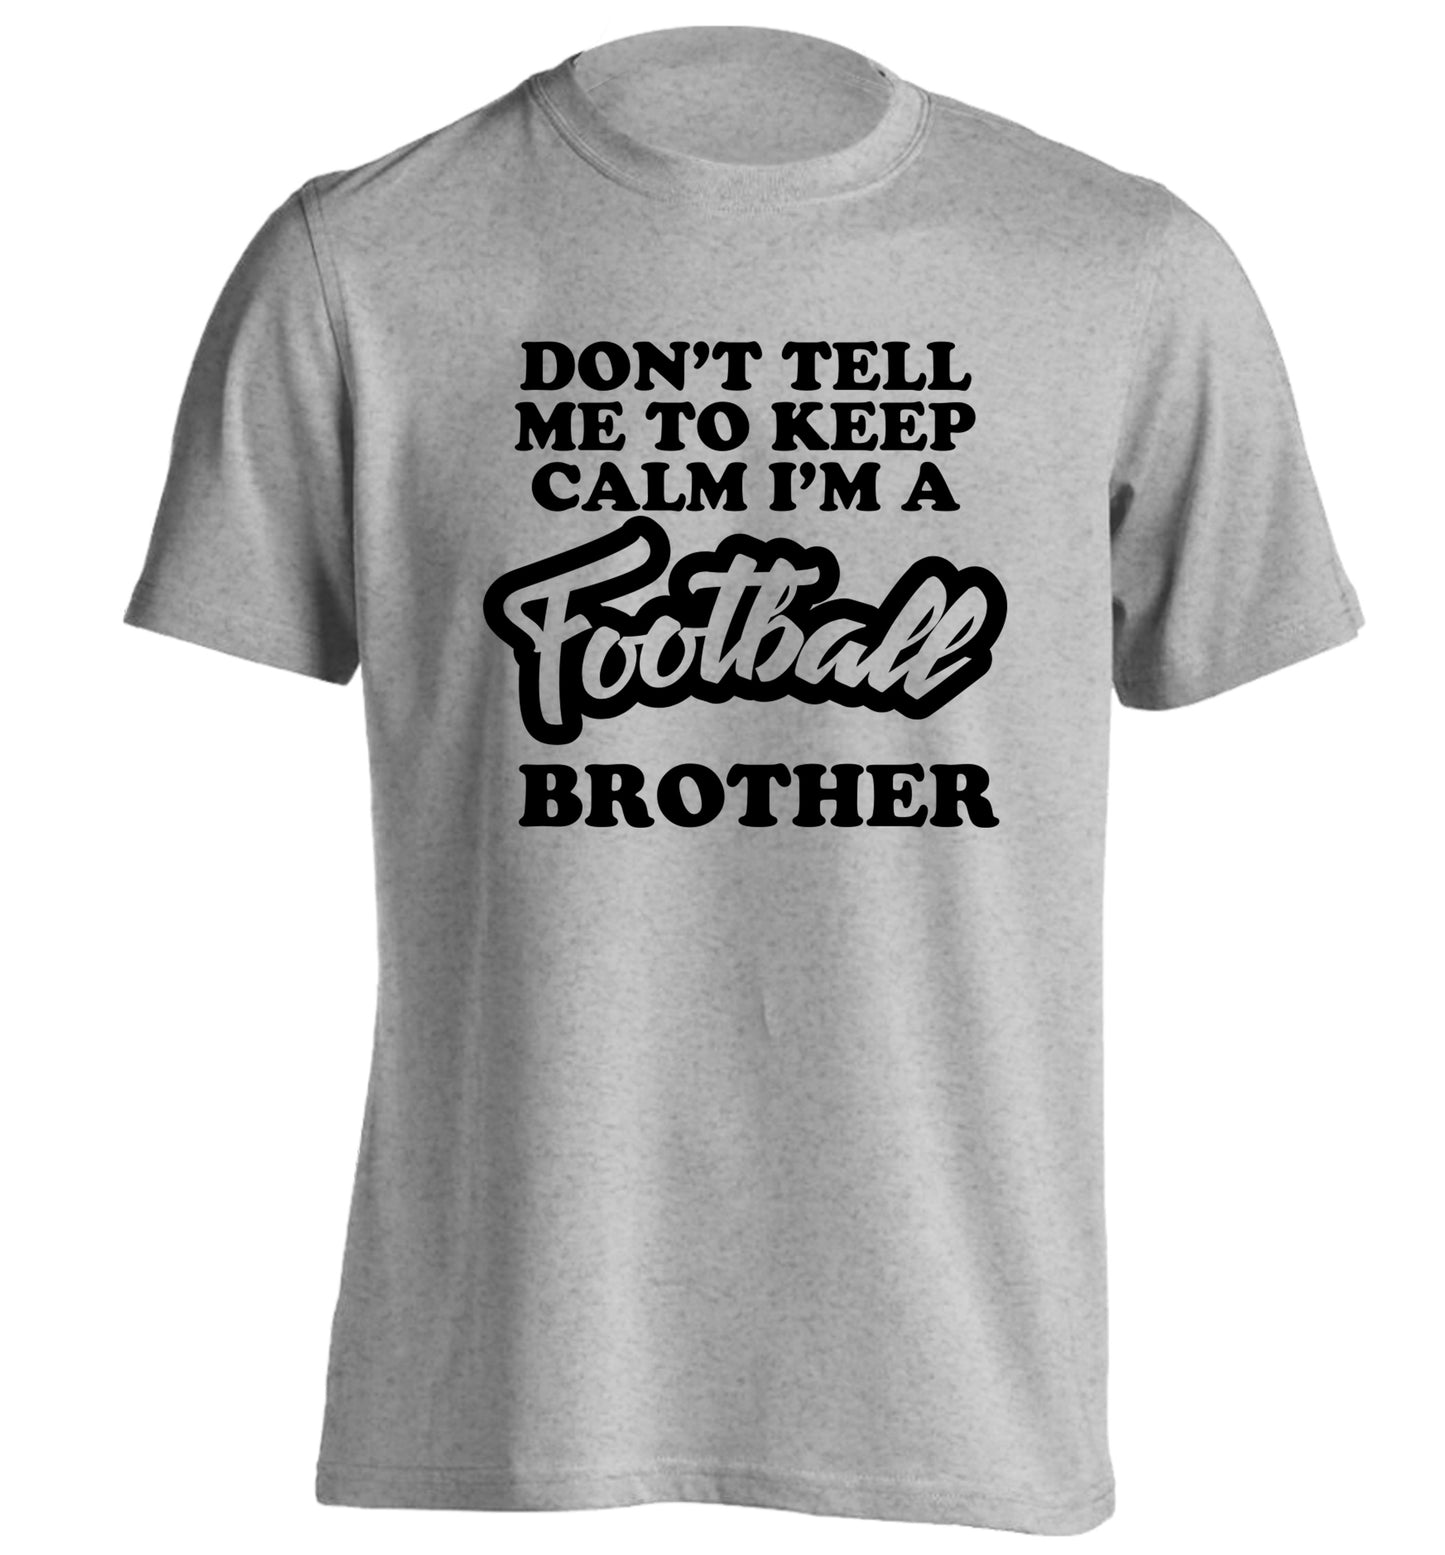 Don't tell me to keep calm I'm a football brother adults unisexgrey Tshirt 2XL